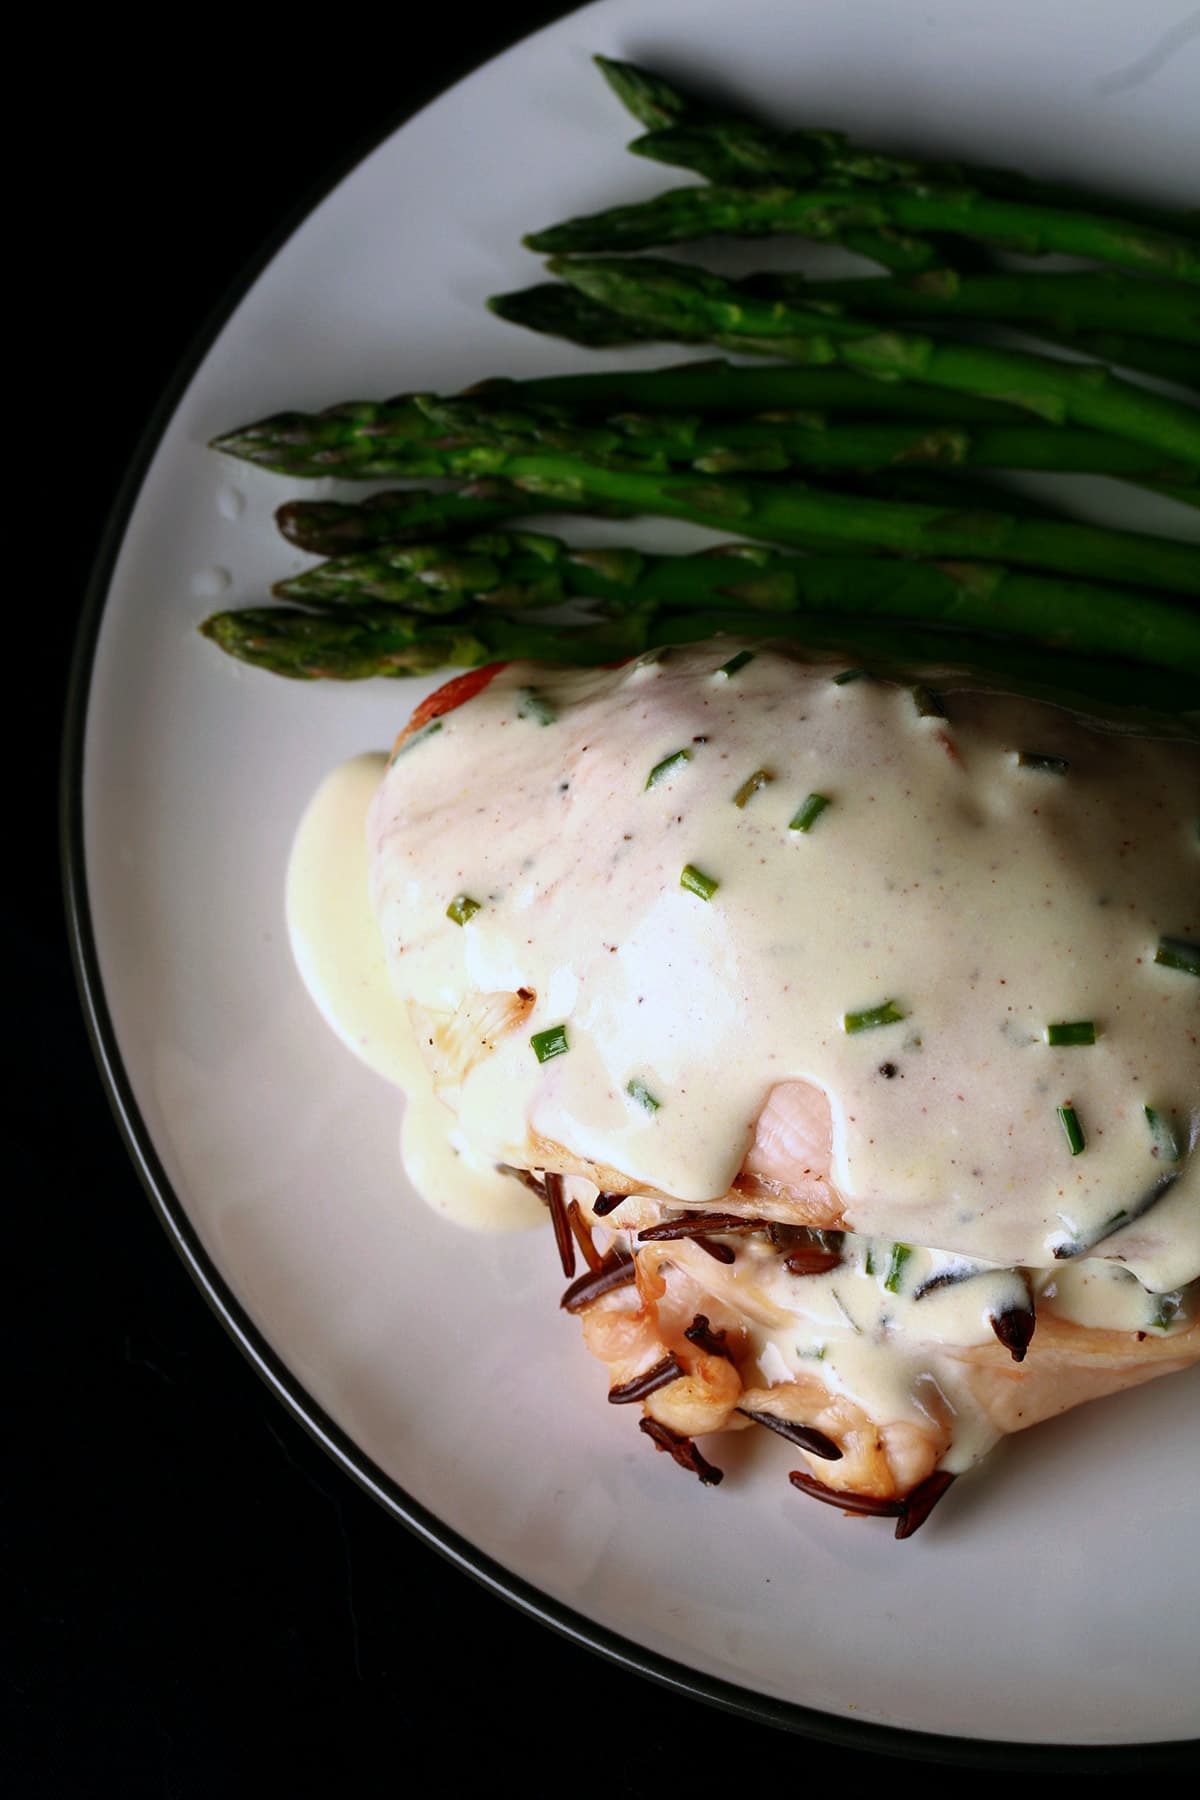 A wild rice stuffed chicken breast on a plate. It is covered in a Dijon chive cream sauce, and there are asparagus spears beside it.